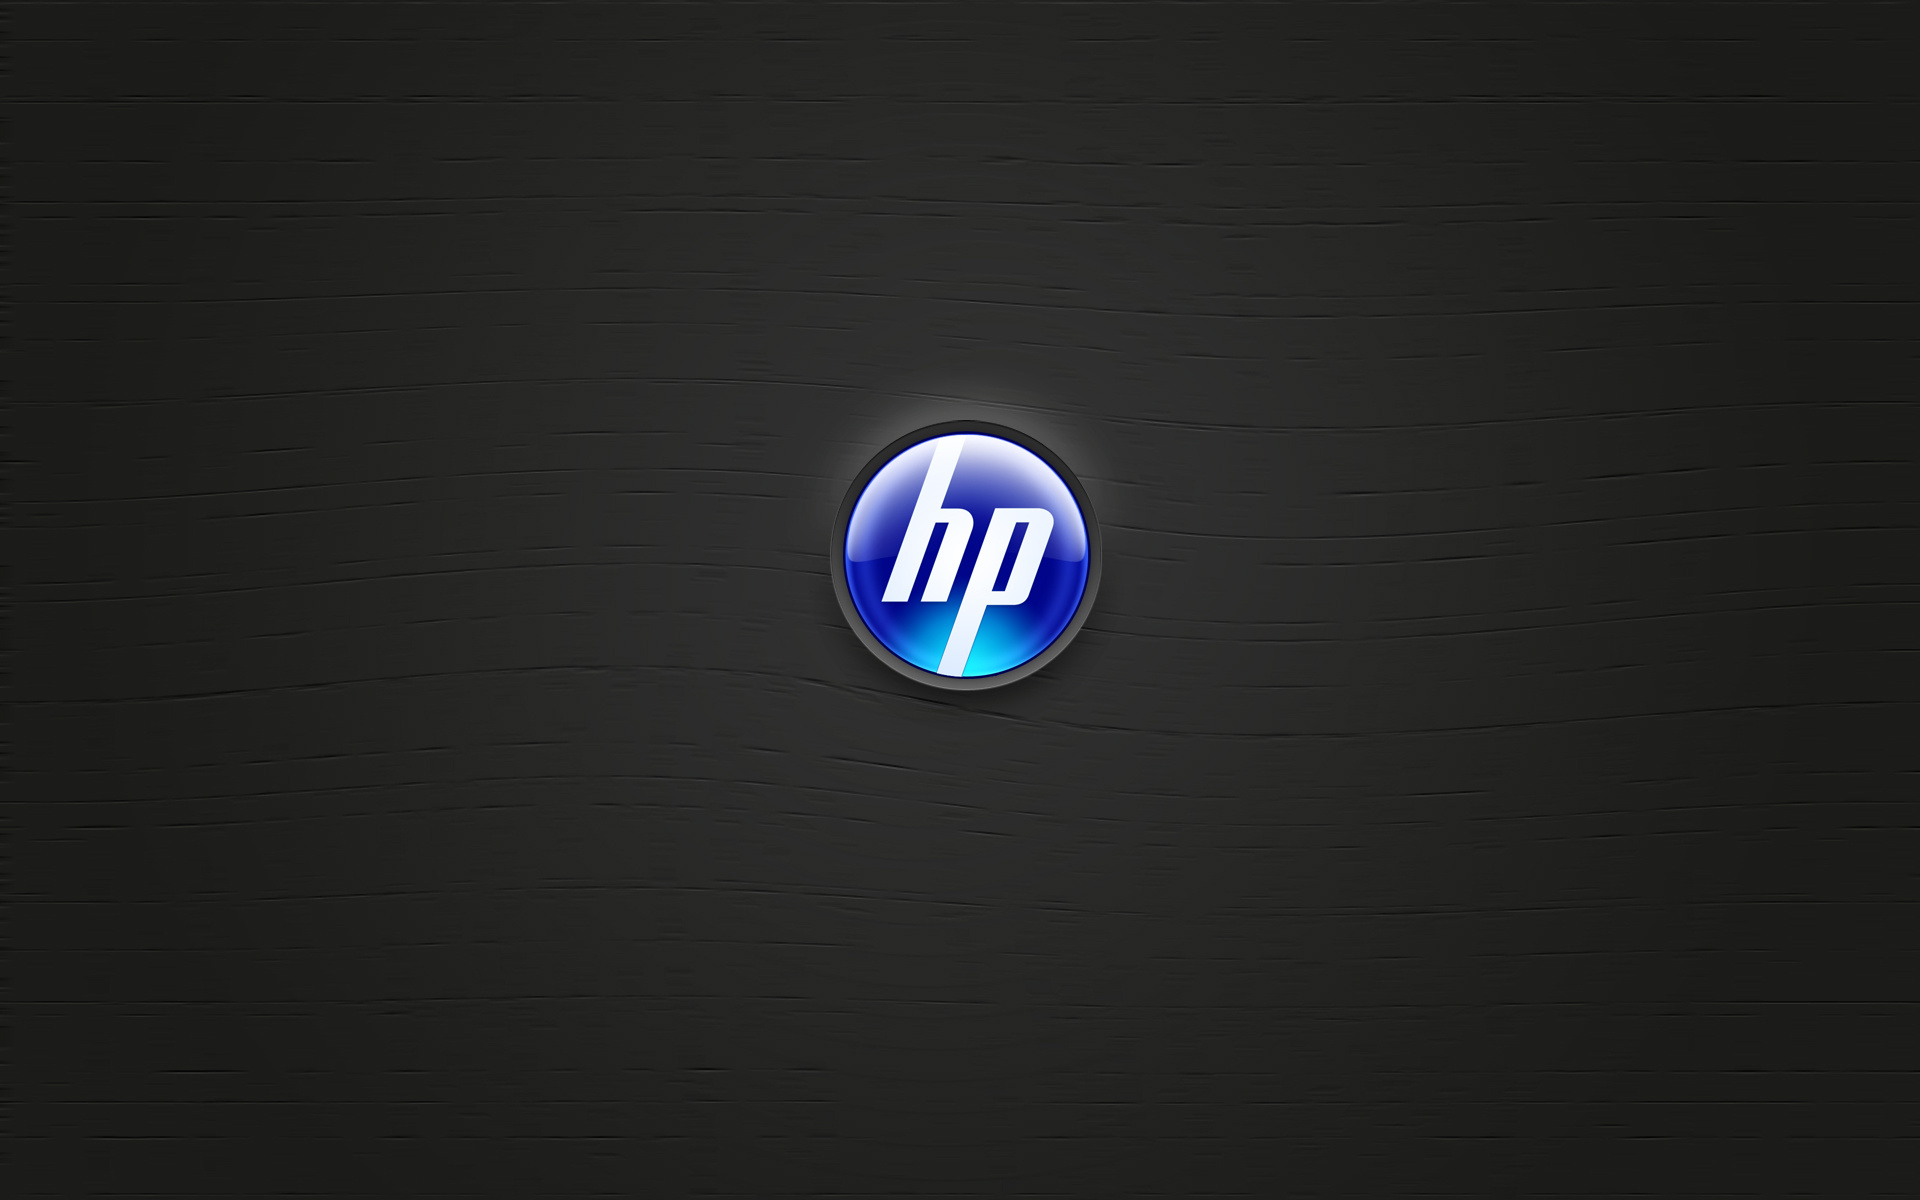 Free download HP wallpapers for Windows 7, High definition images, WallpapercomphotoHP website, Live wallpapers for HP laptops, 1920x1200 HD Desktop